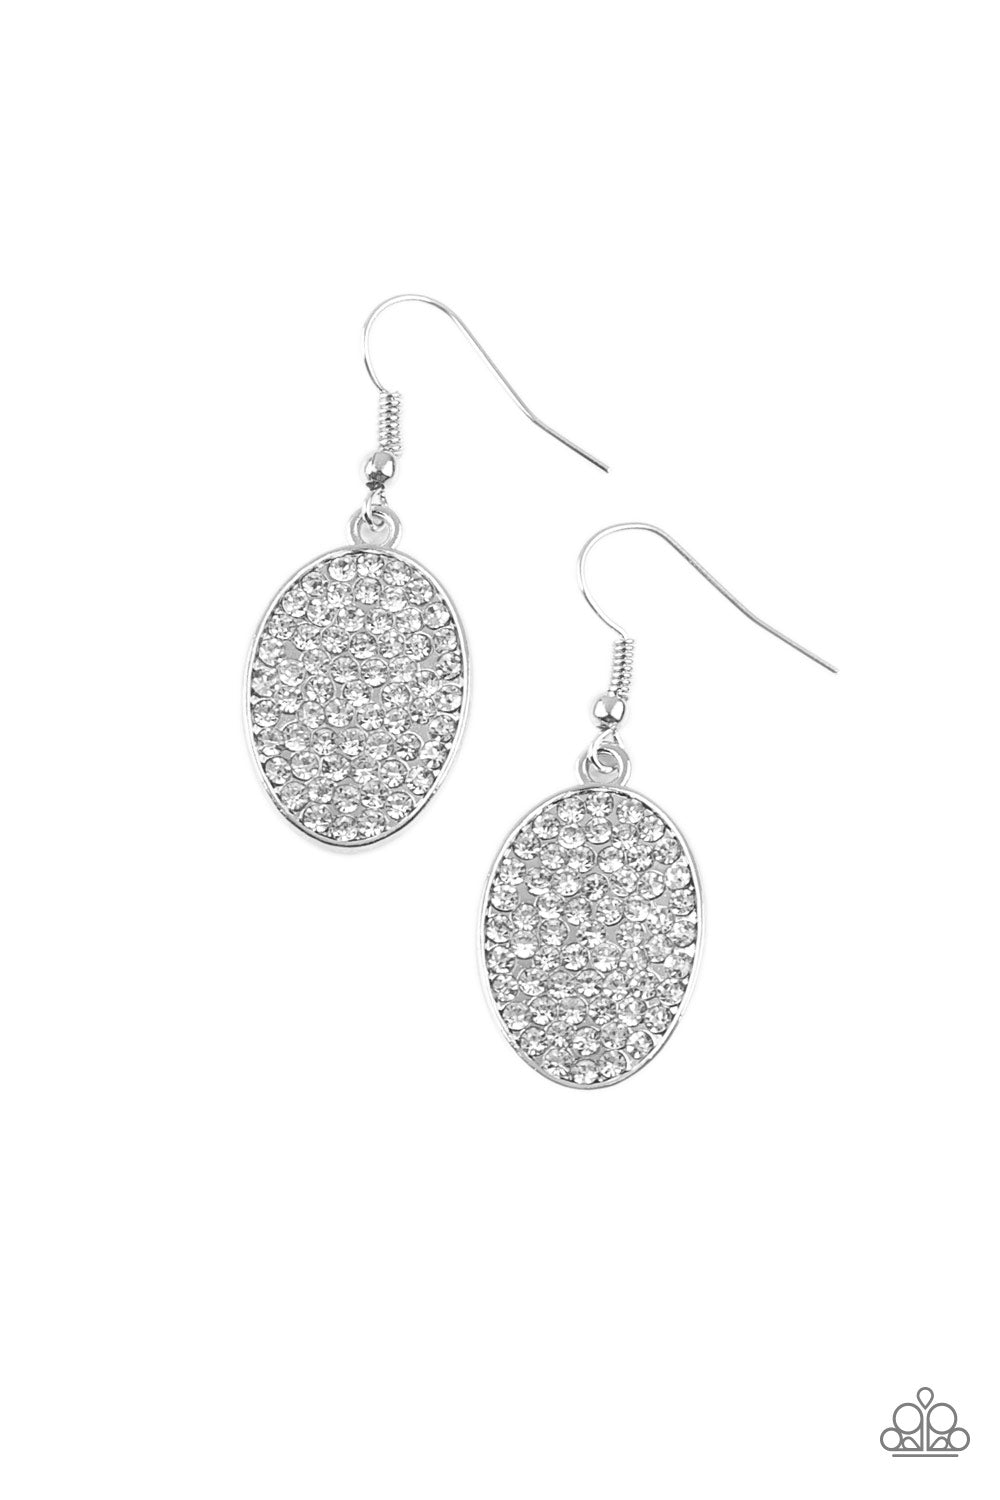 ALL DAZZLE - WHITE EARRING